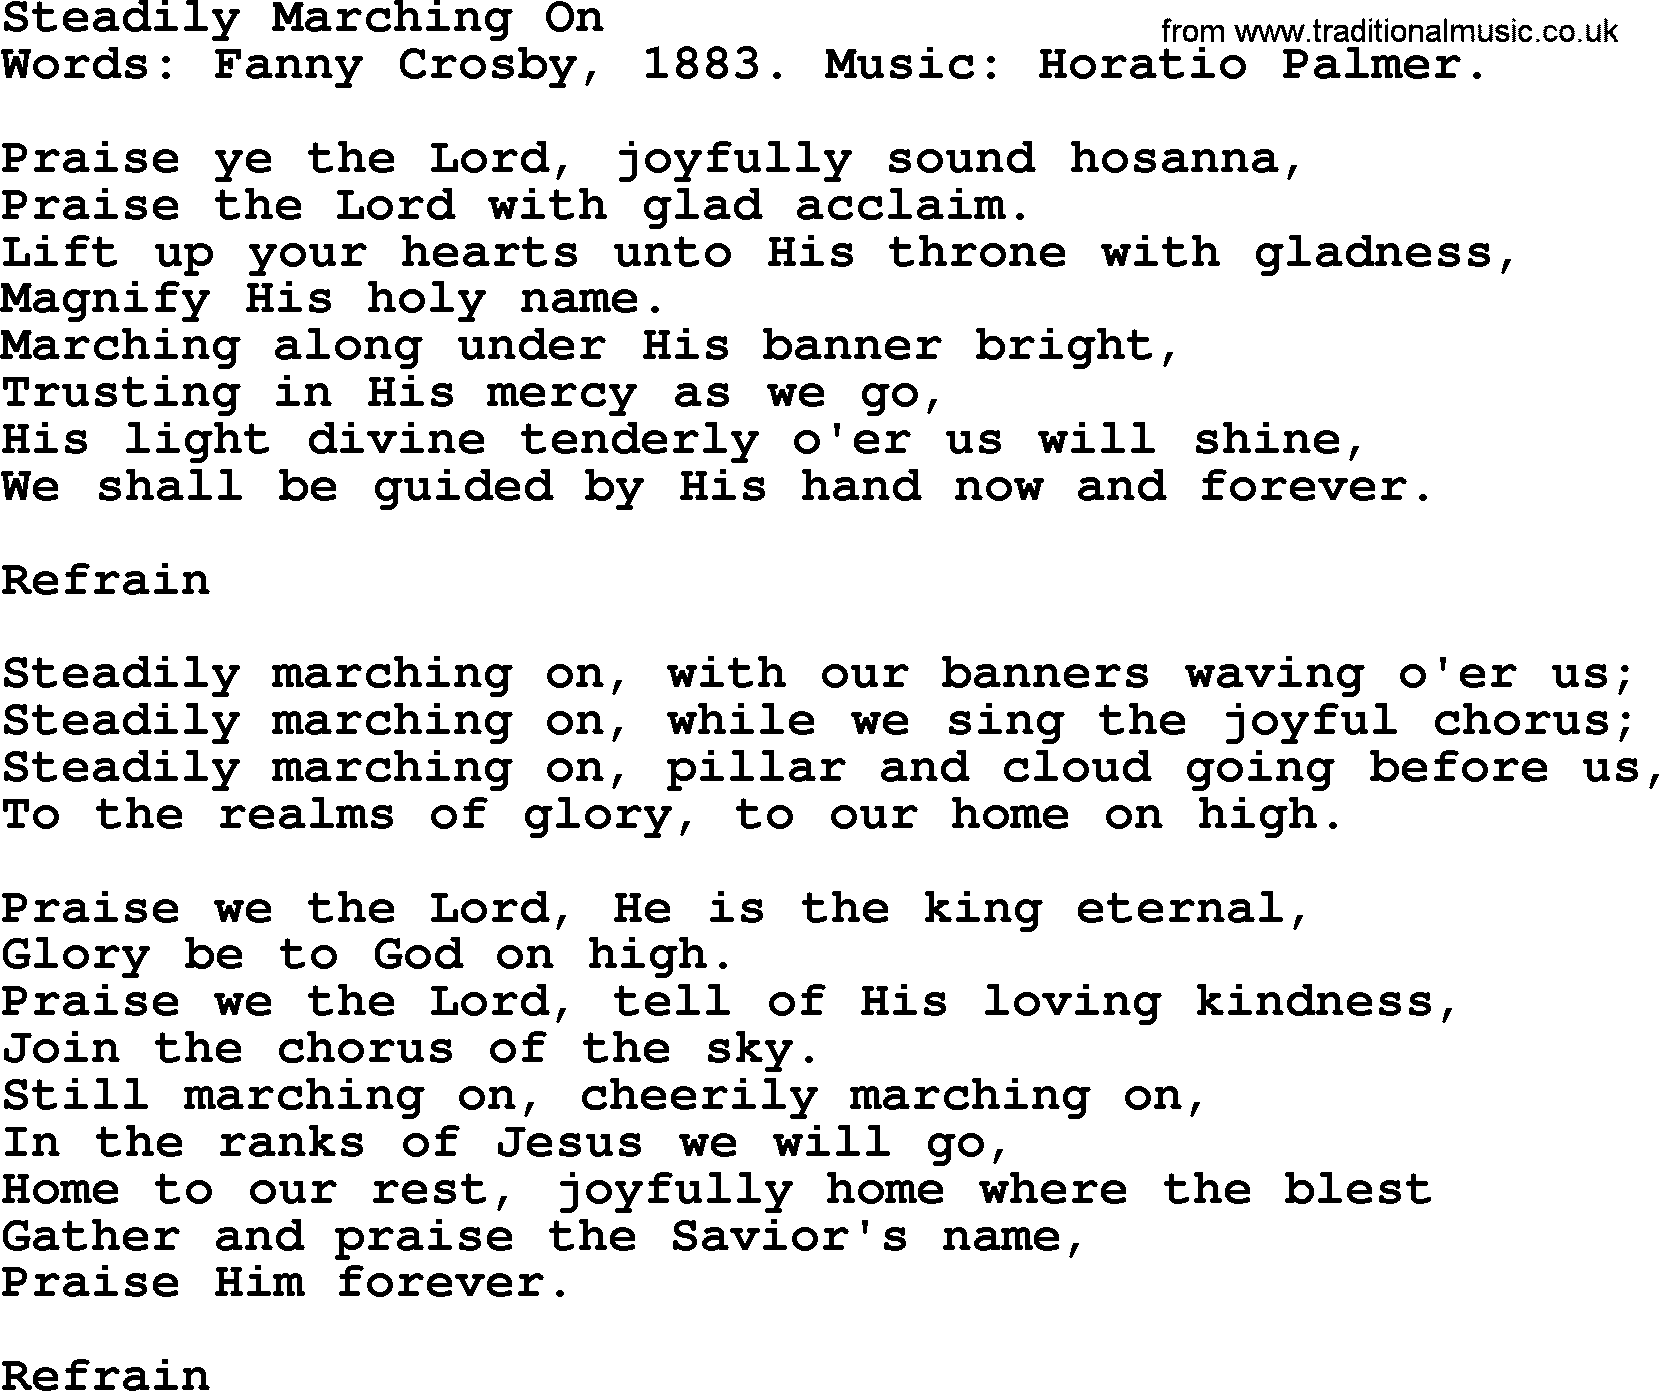 Fanny Crosby song: Steadily Marching On, lyrics